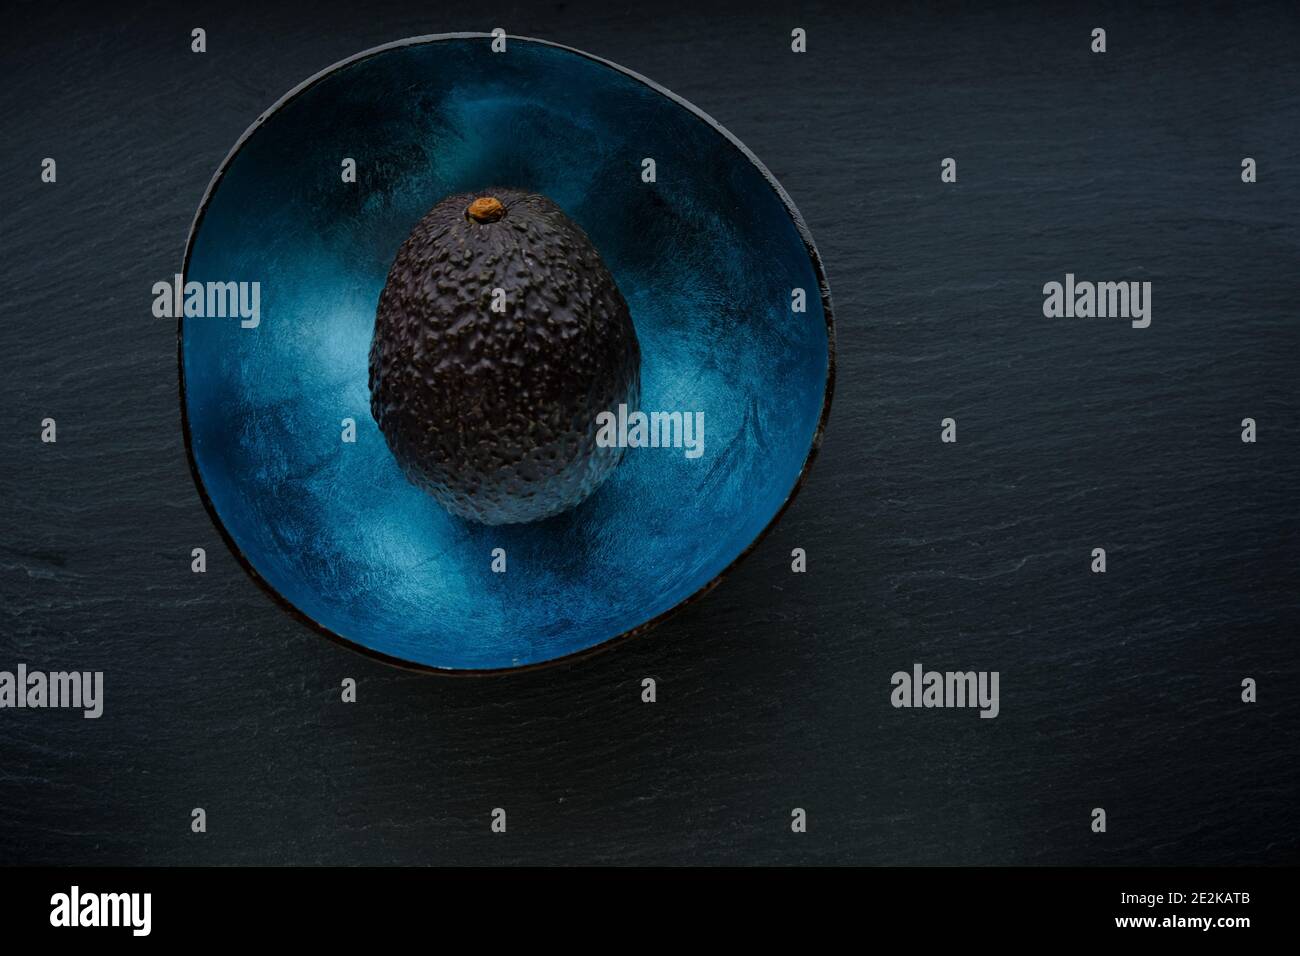 Avocado. brown avocado fruits in a blue cup on a black slate background.Super food. useful food product. Stock Photo